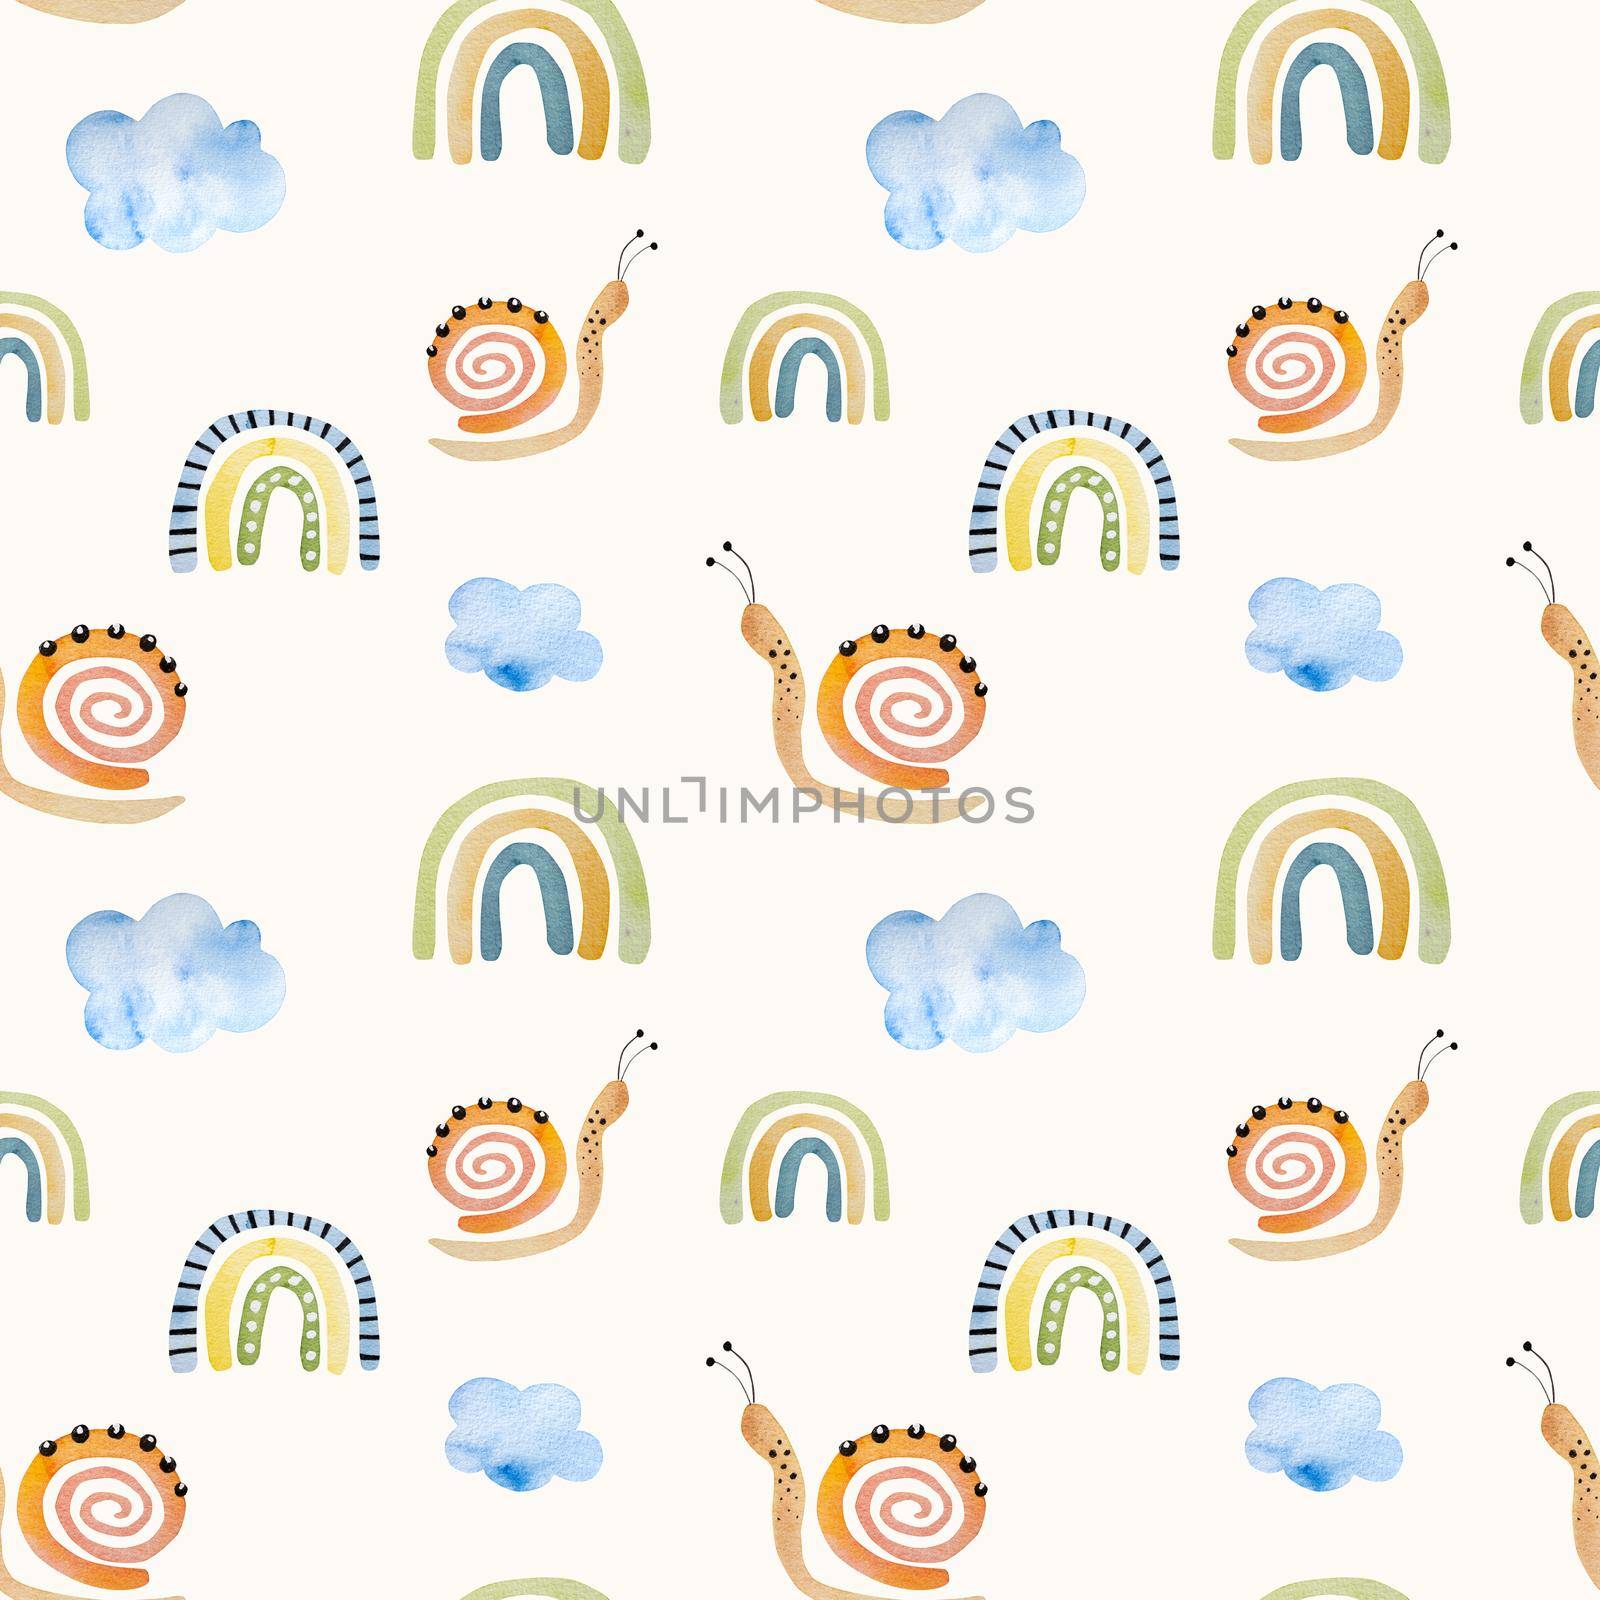 Rainbow, snail and cloud spring watercolor drawings seamless pattern. Nature aquarelle paintings set with mollusk